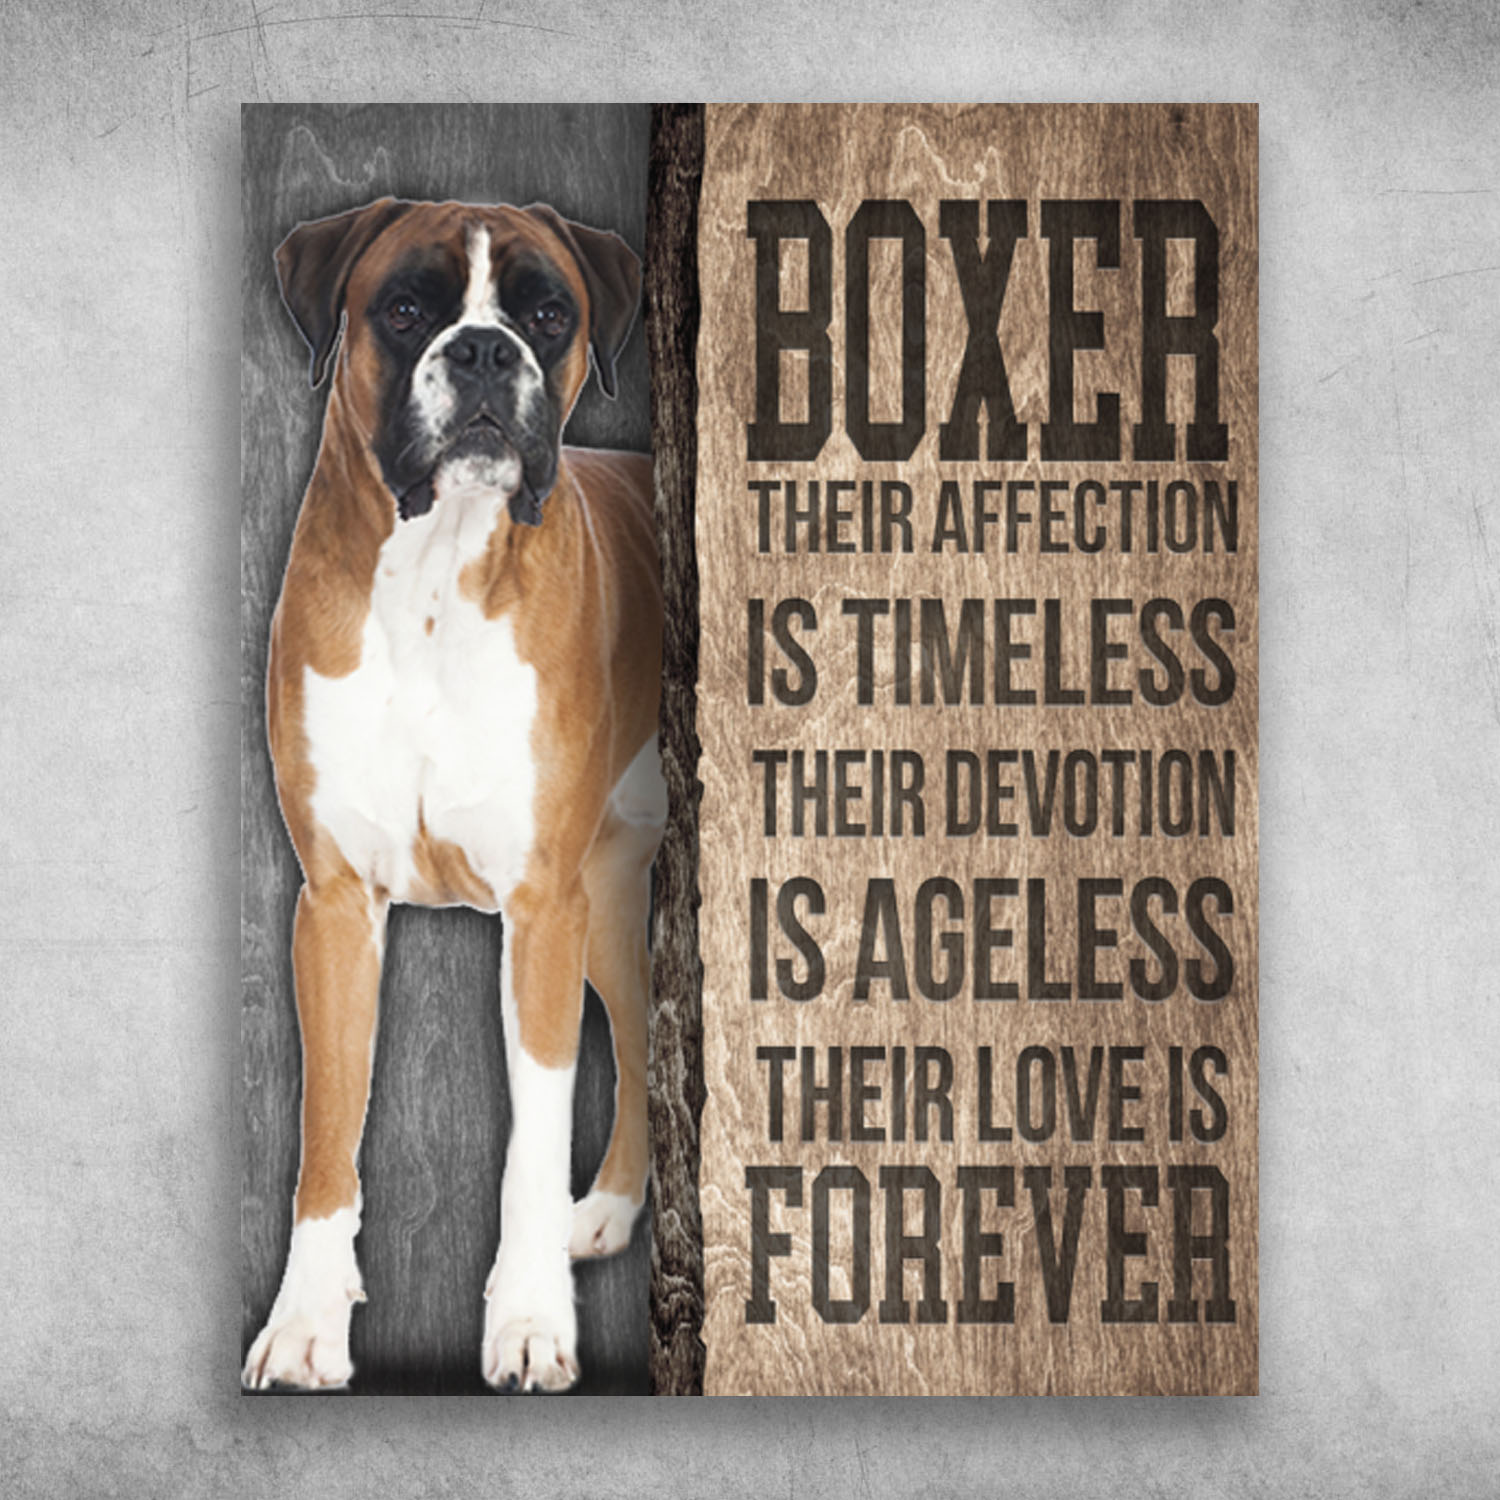 Boxer Their Affection Is Timeless Their Love Is Forever